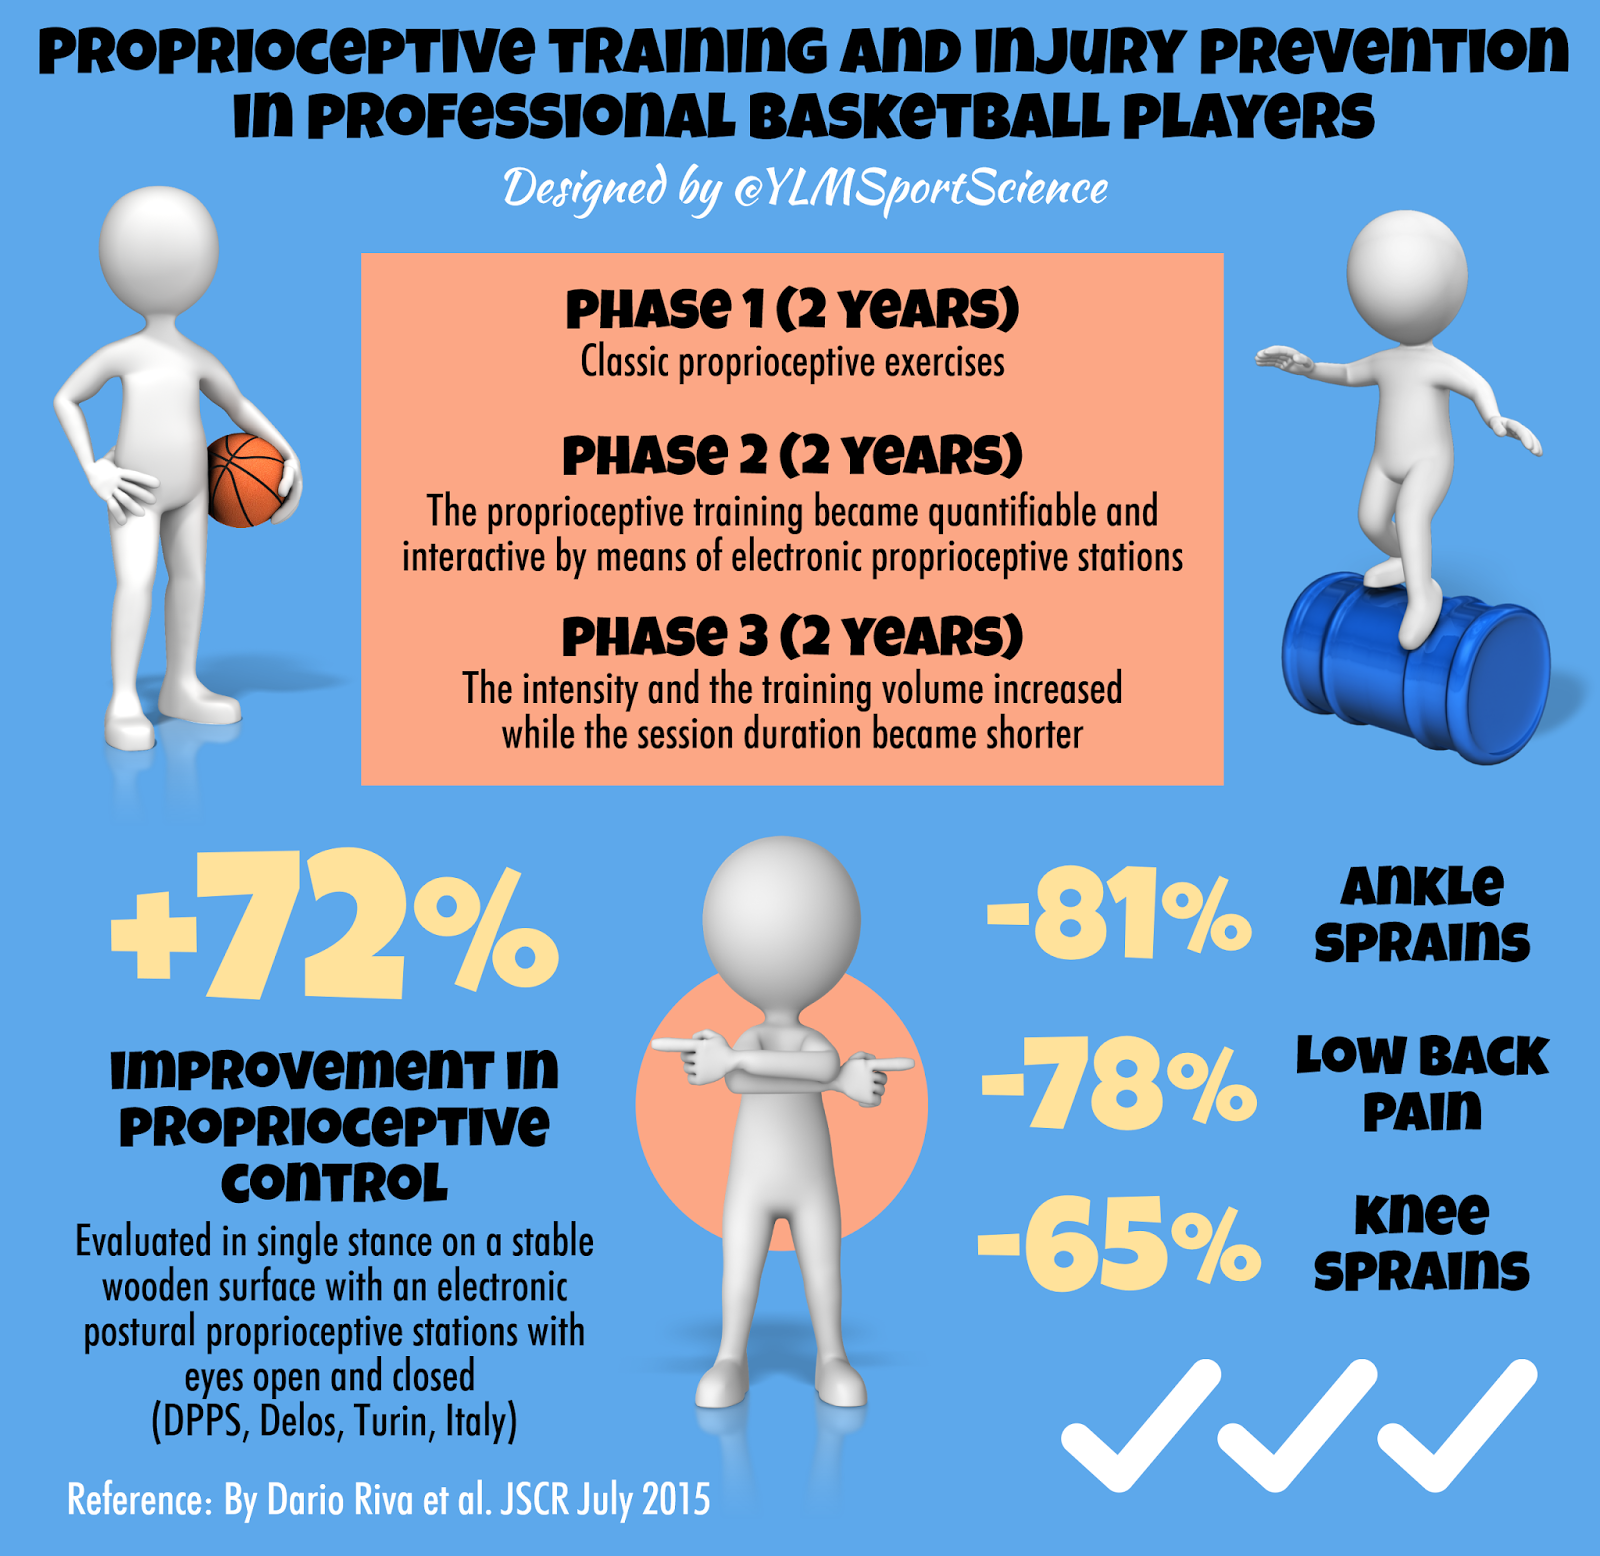 Injury prevention in basketball